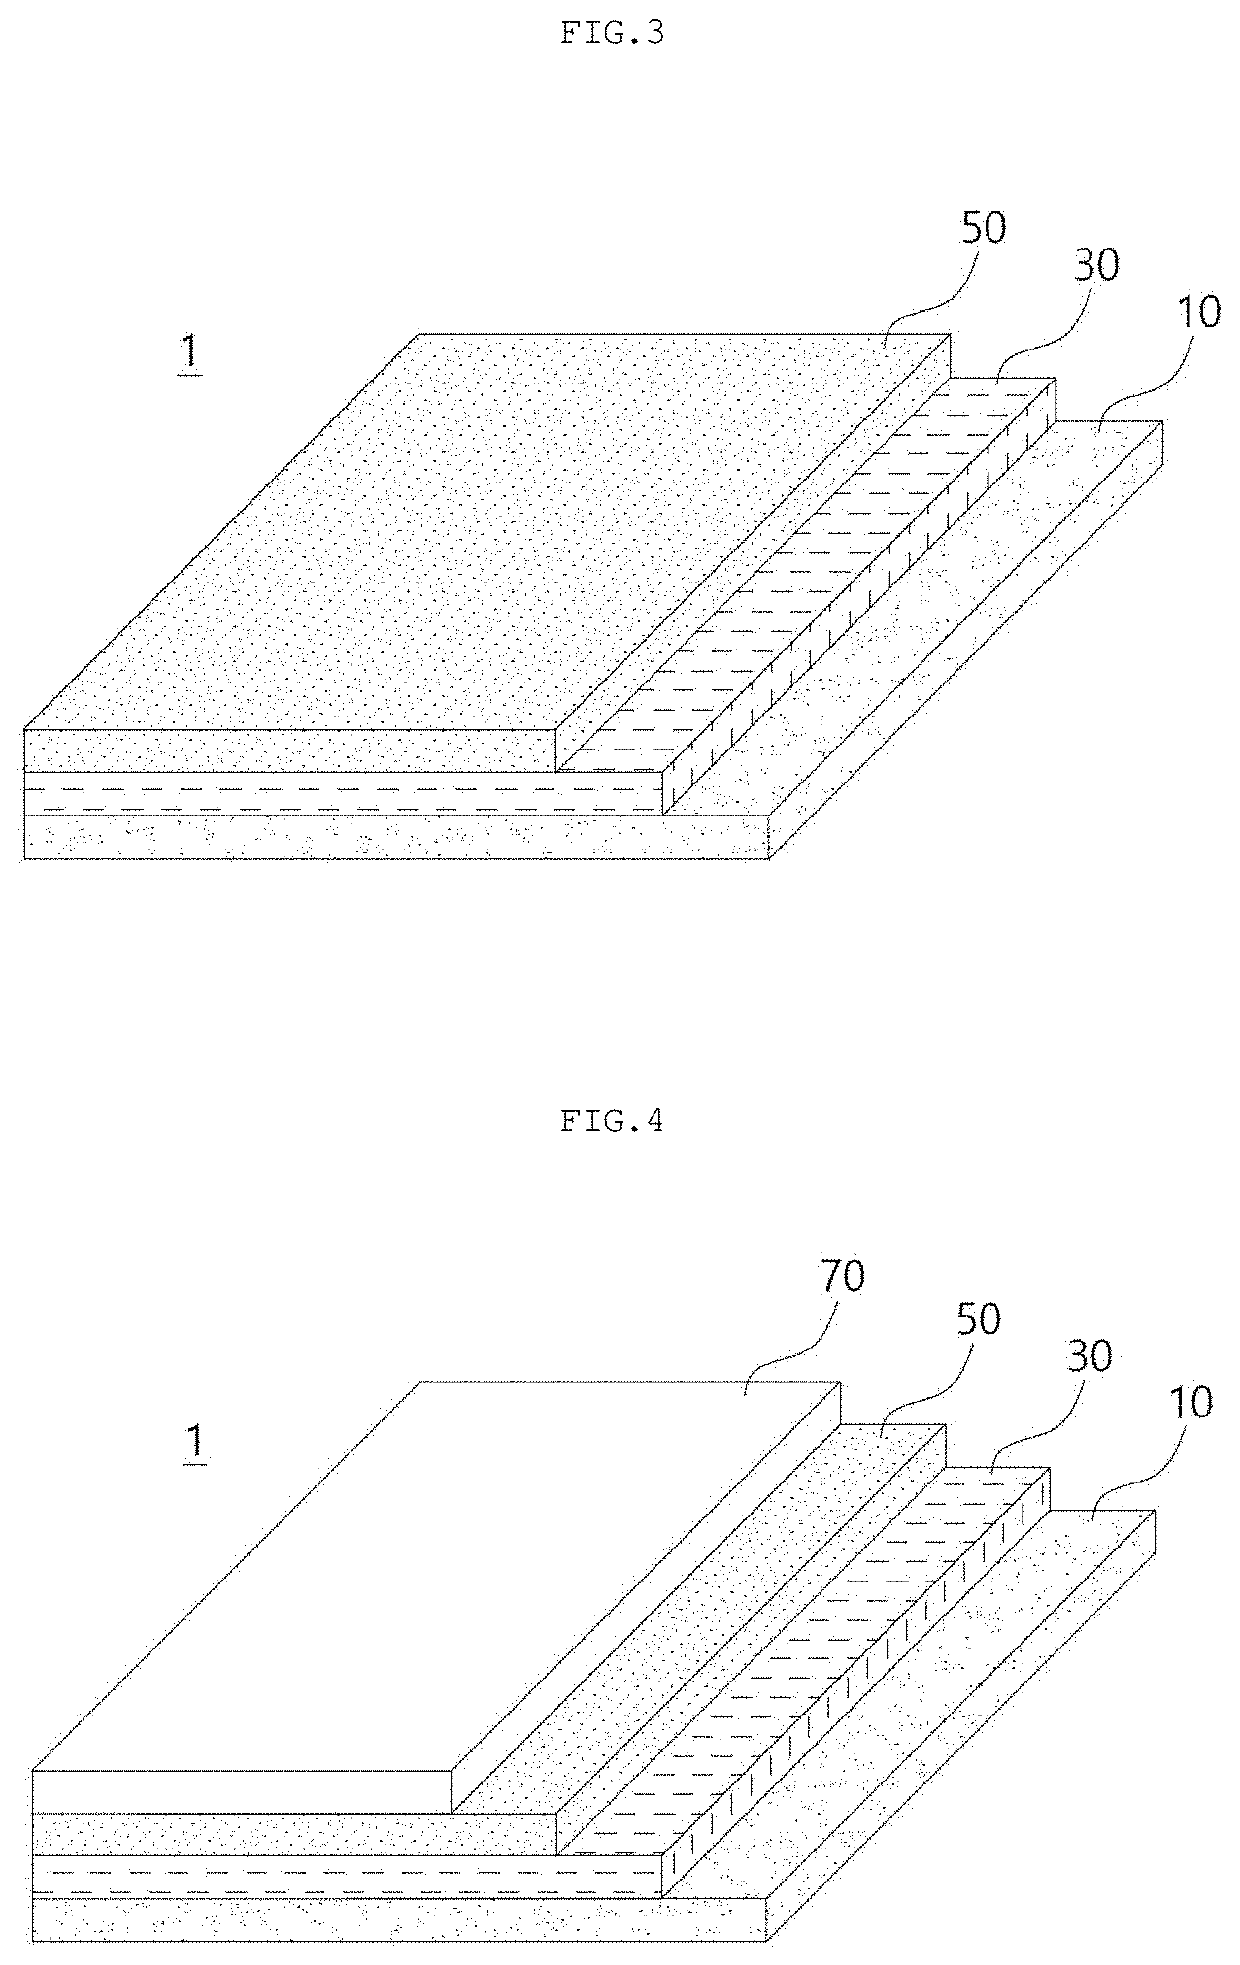 Environment-Friendly Heat Shielding Film Using Non-radioactive Stable Isotope and Manufacturing Method Thereof